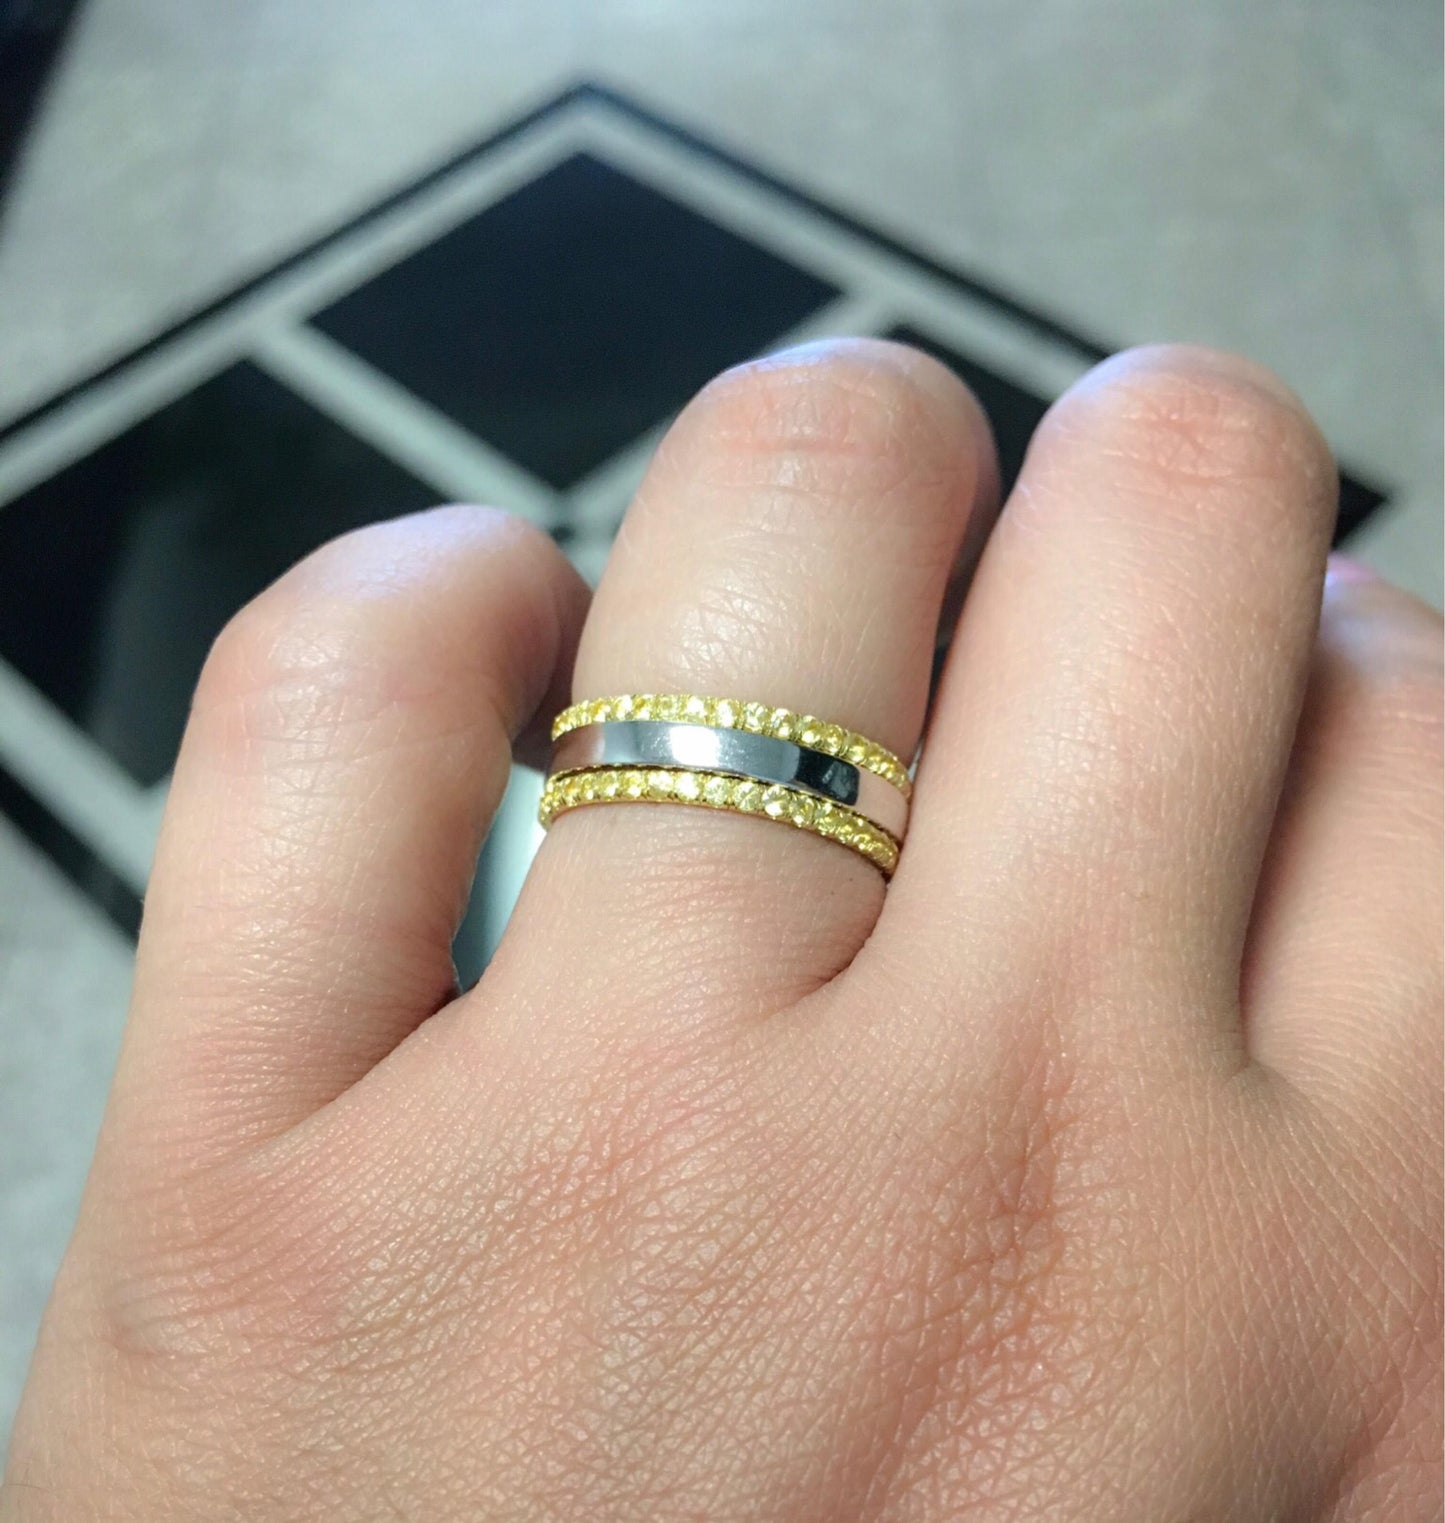 Set of 3 Bands; 2 1.6mm Full Eternity Yellow Sapphire Pave Bands, 1 2.5mm 14K Plain Band